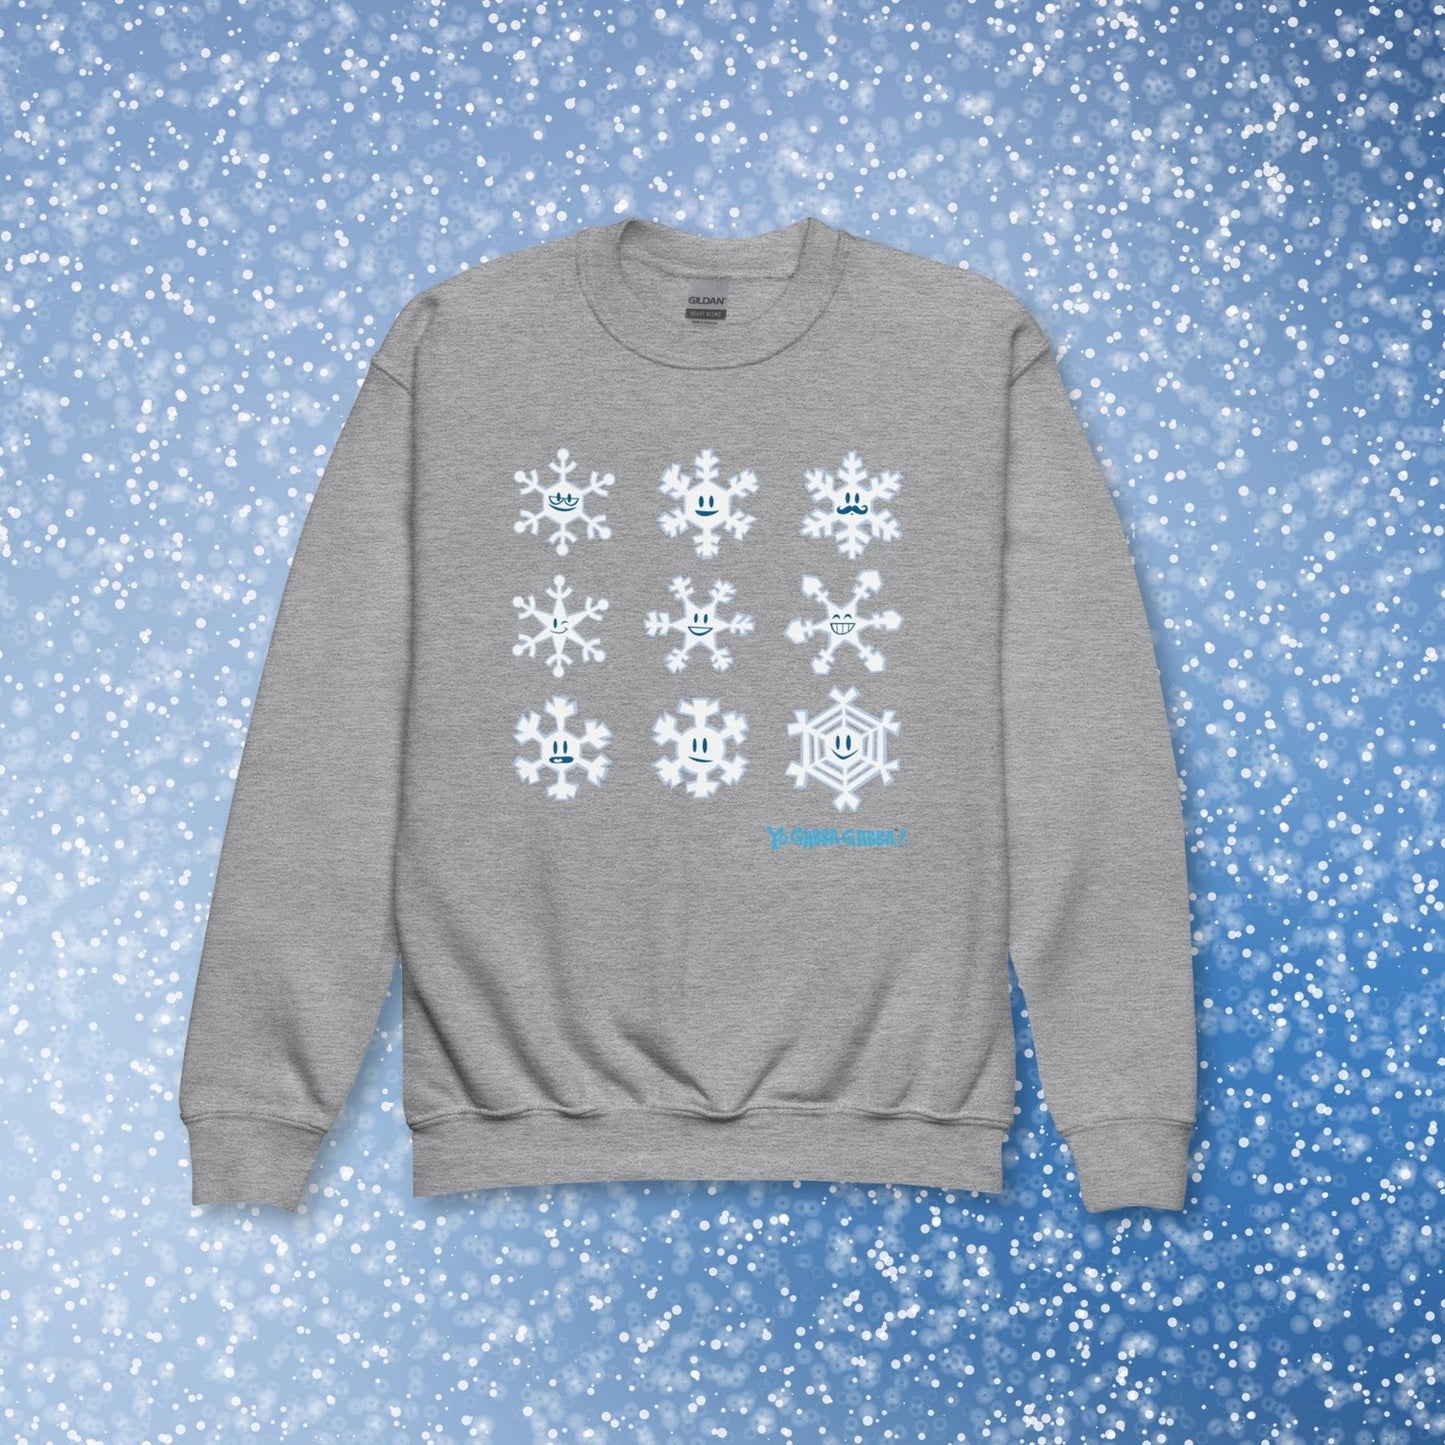 Different Snowflakes Youth Sweatshirt!